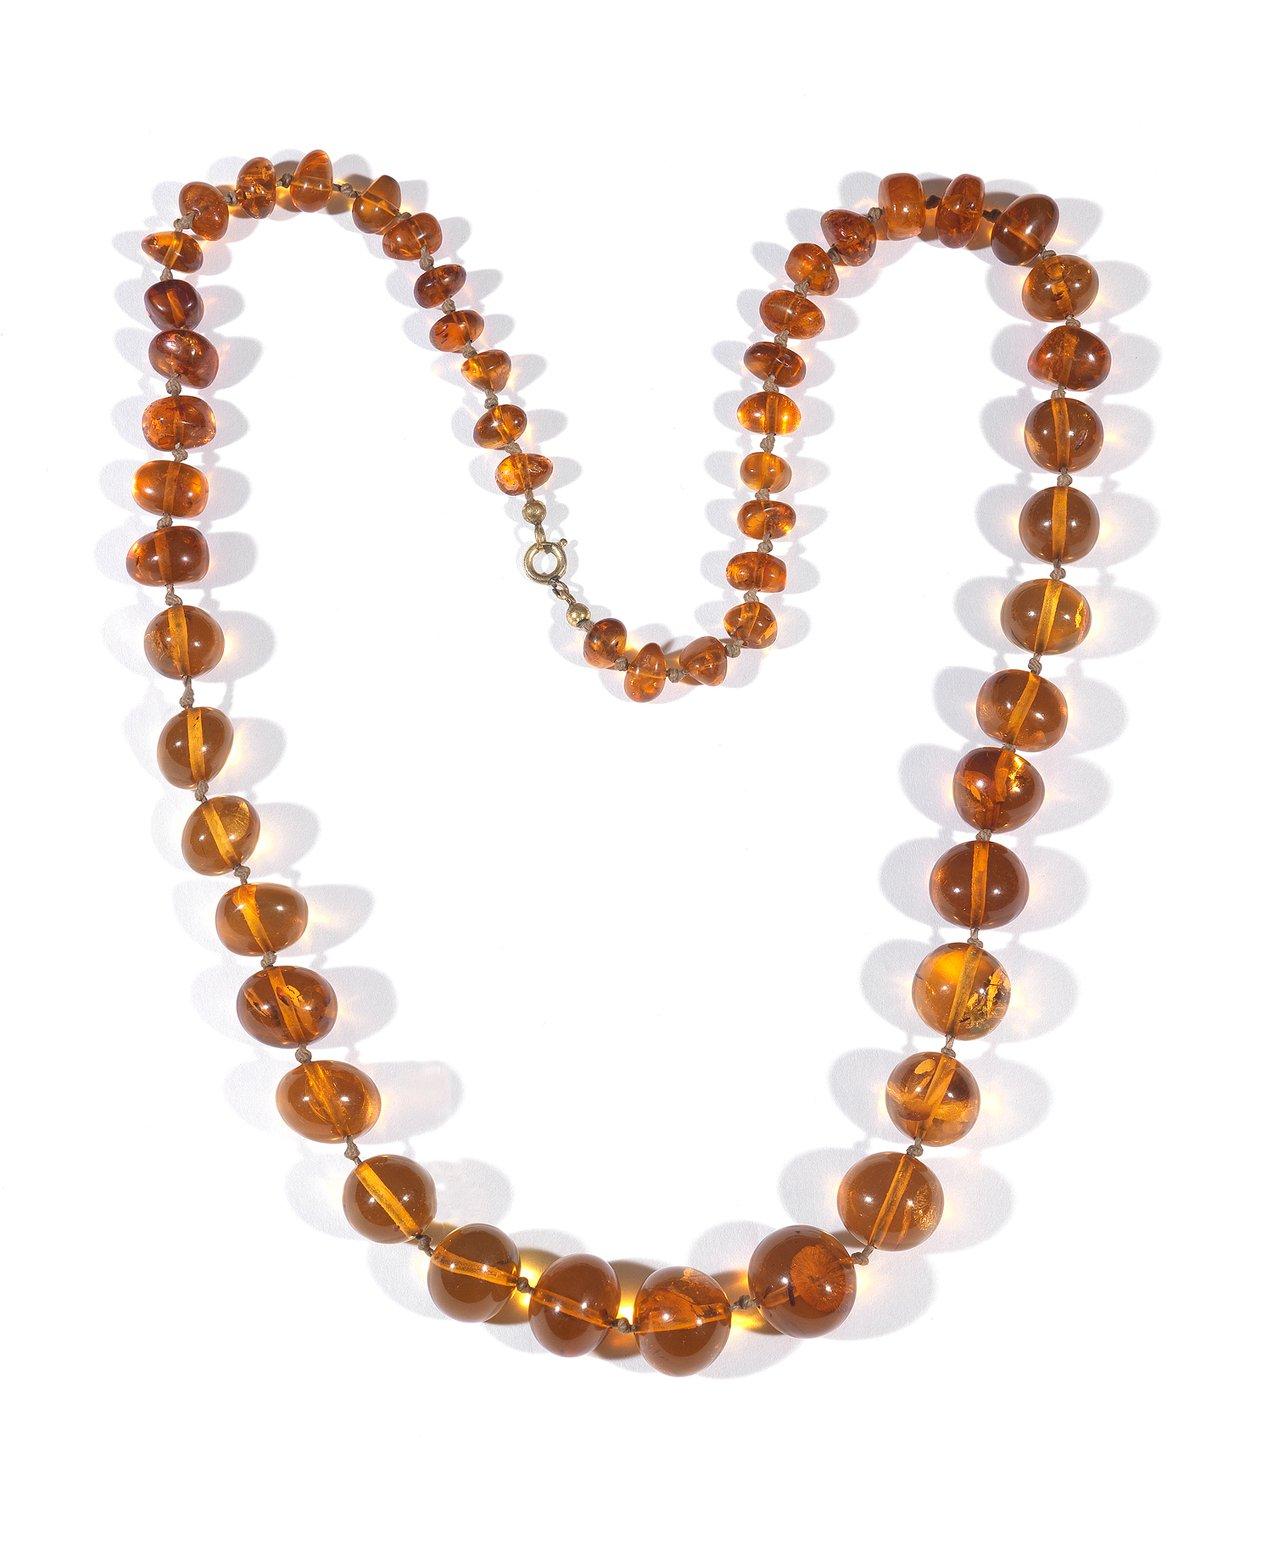 Amber Bead Necklace In Excellent Condition For Sale In Firenze, IT